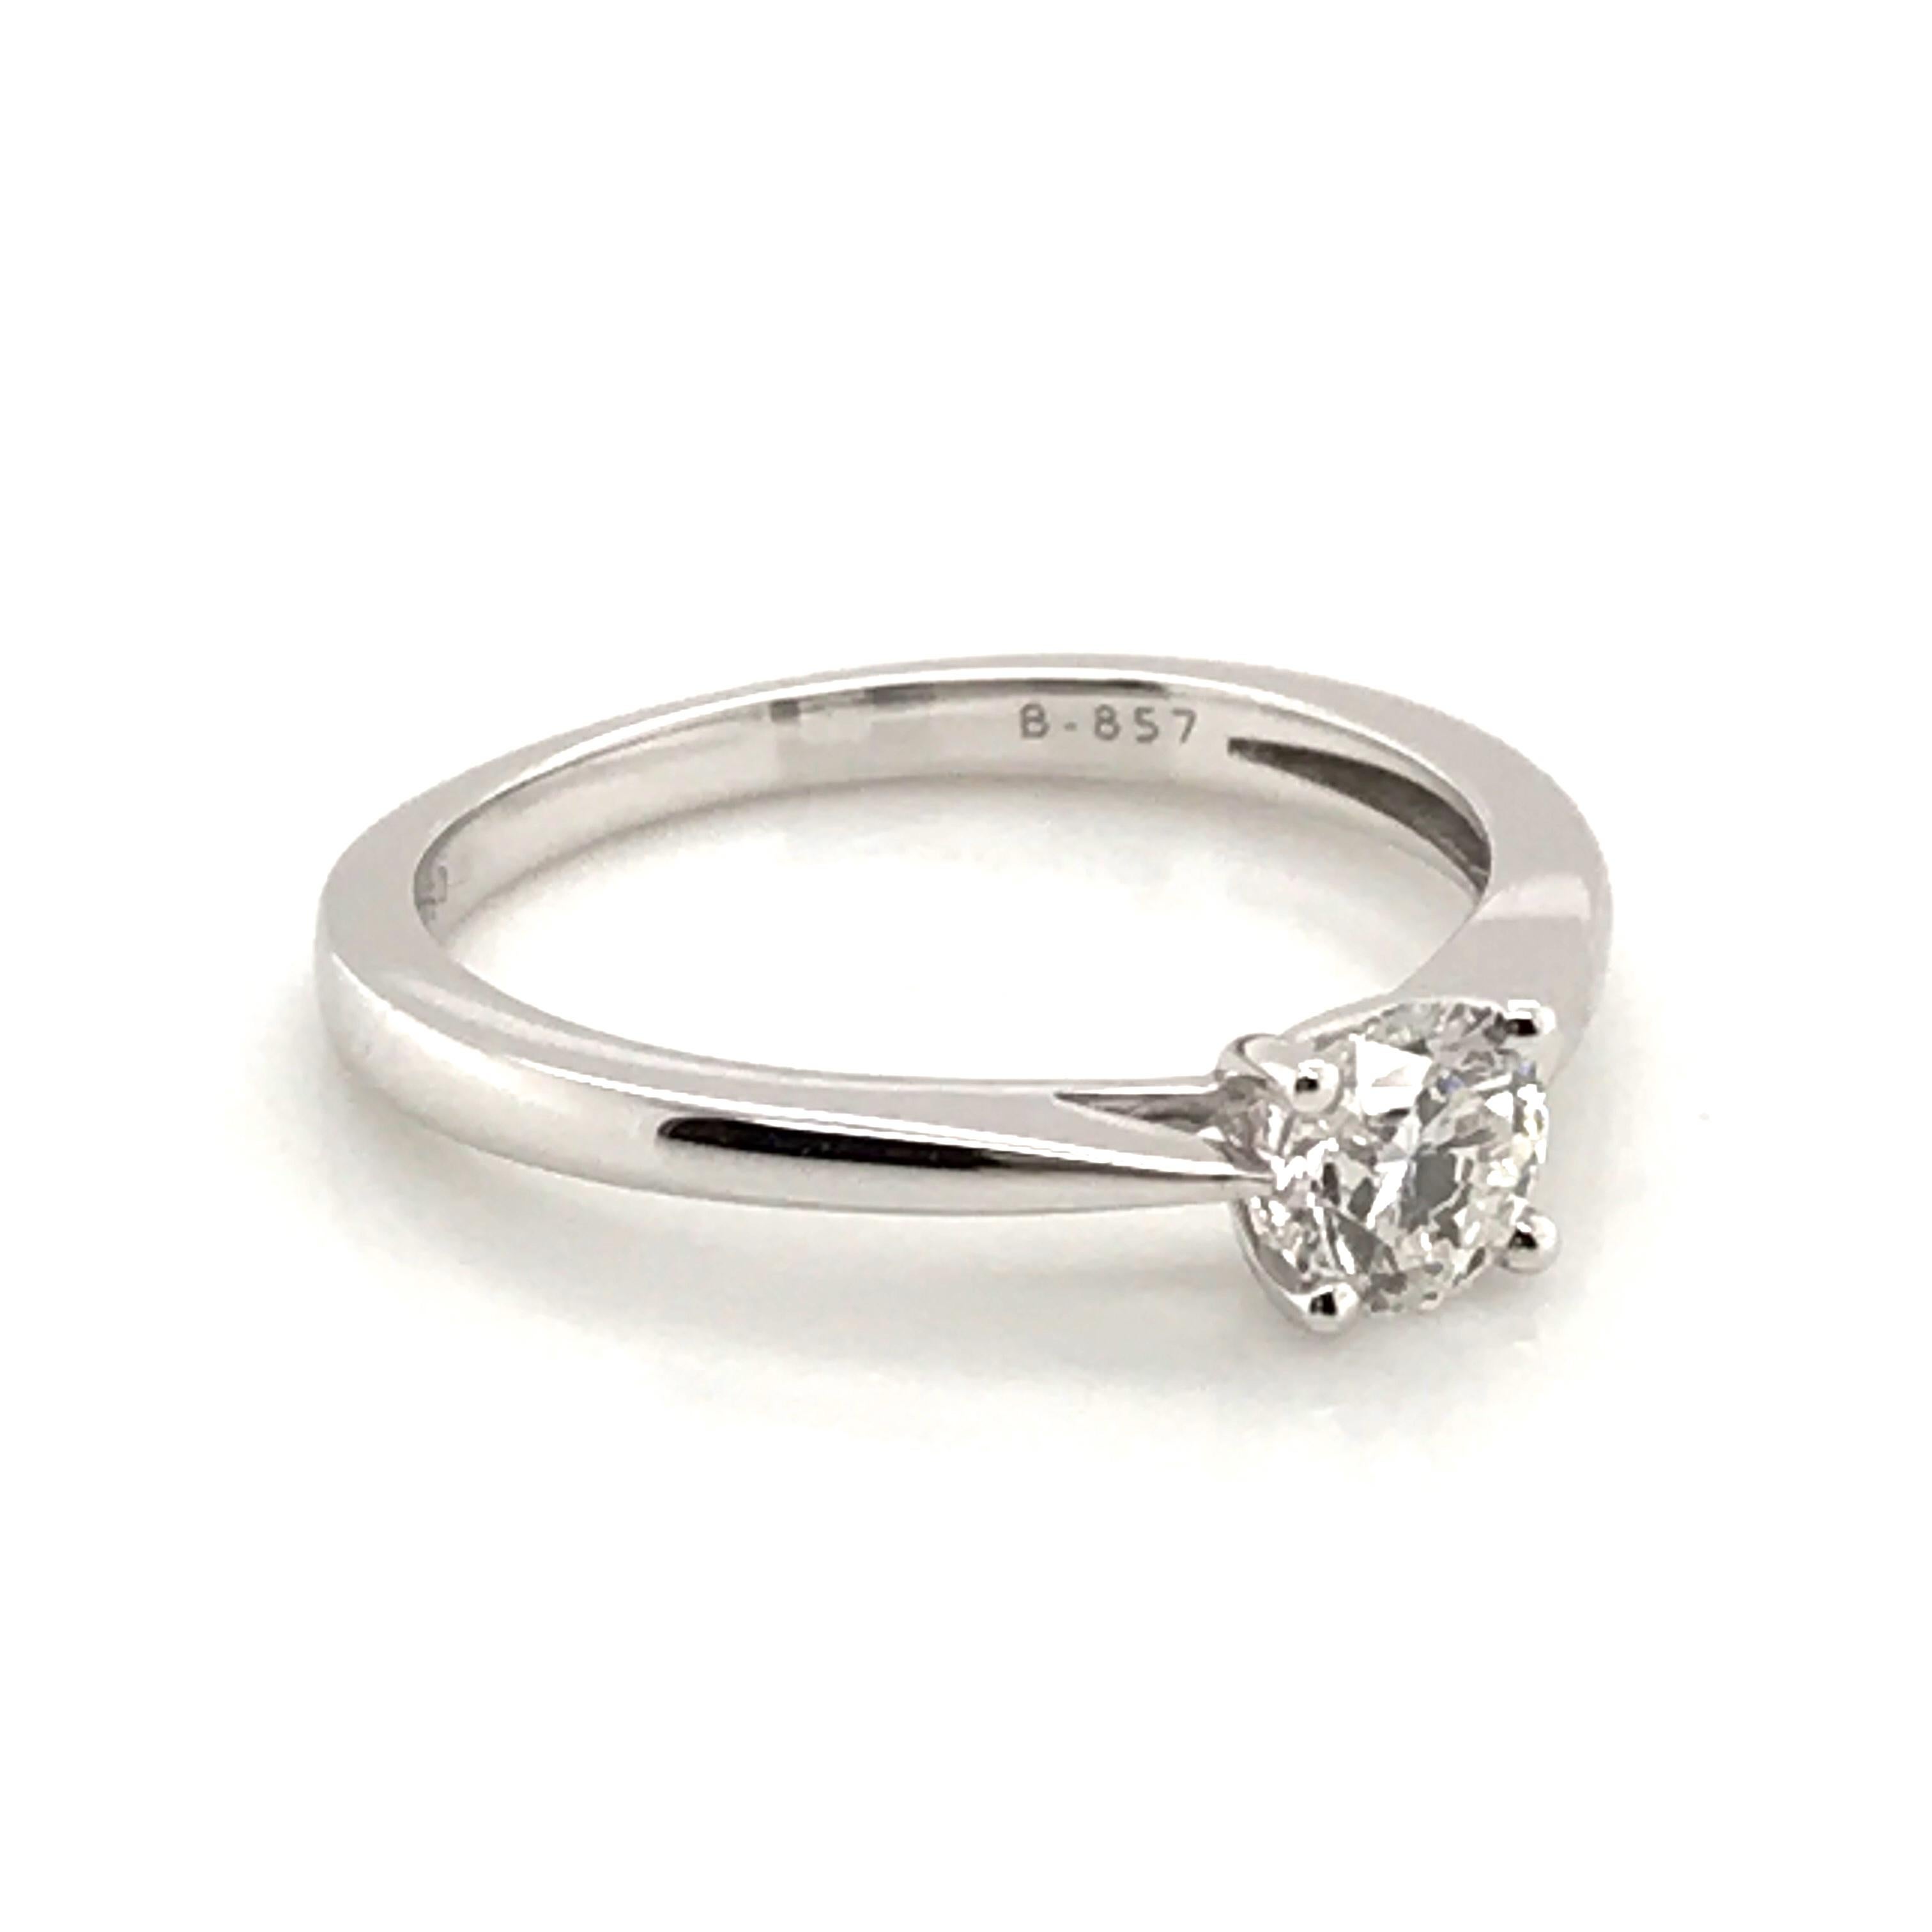 Solitaire Ring White Diamond Certified Color F White Gold 18 Karat For Sale 5